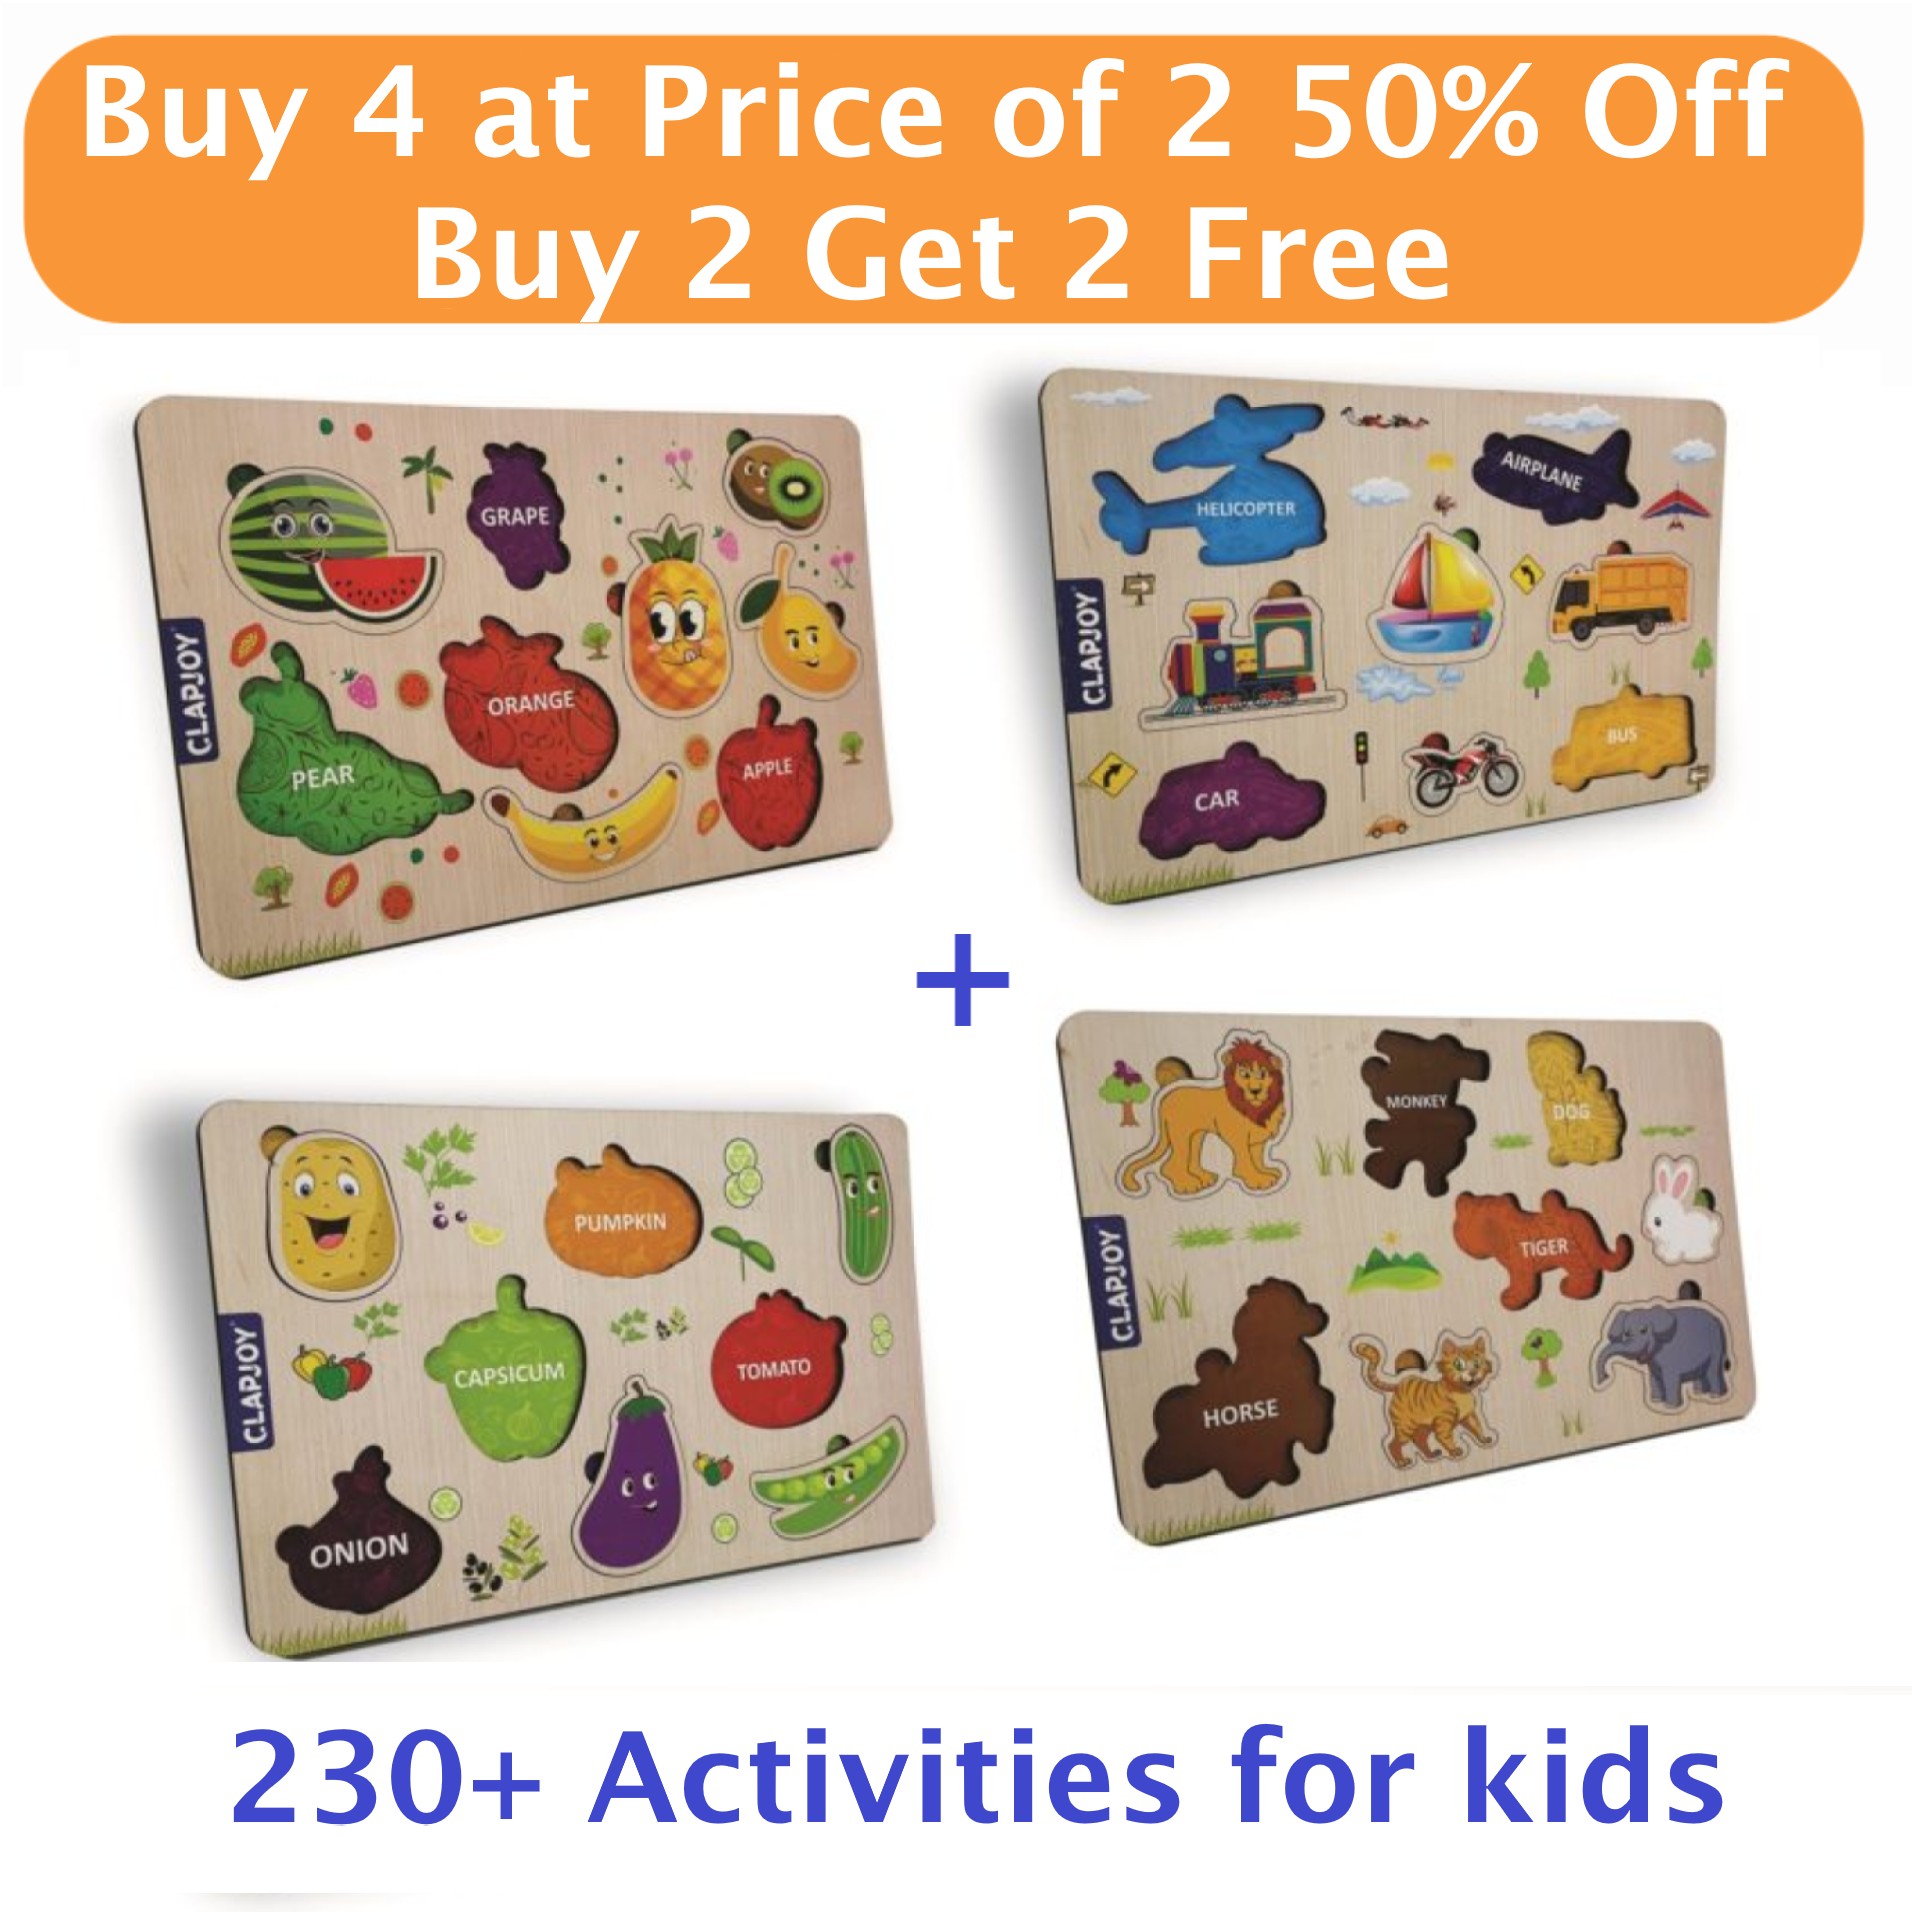 Clapjoy Wooden Learning Educational Board for Kids (Buy 2 Get 2 Free) (230+ Activities Learn Animals, Fruits, Vehicles, Vegetables, Color, Spelling & Shape)